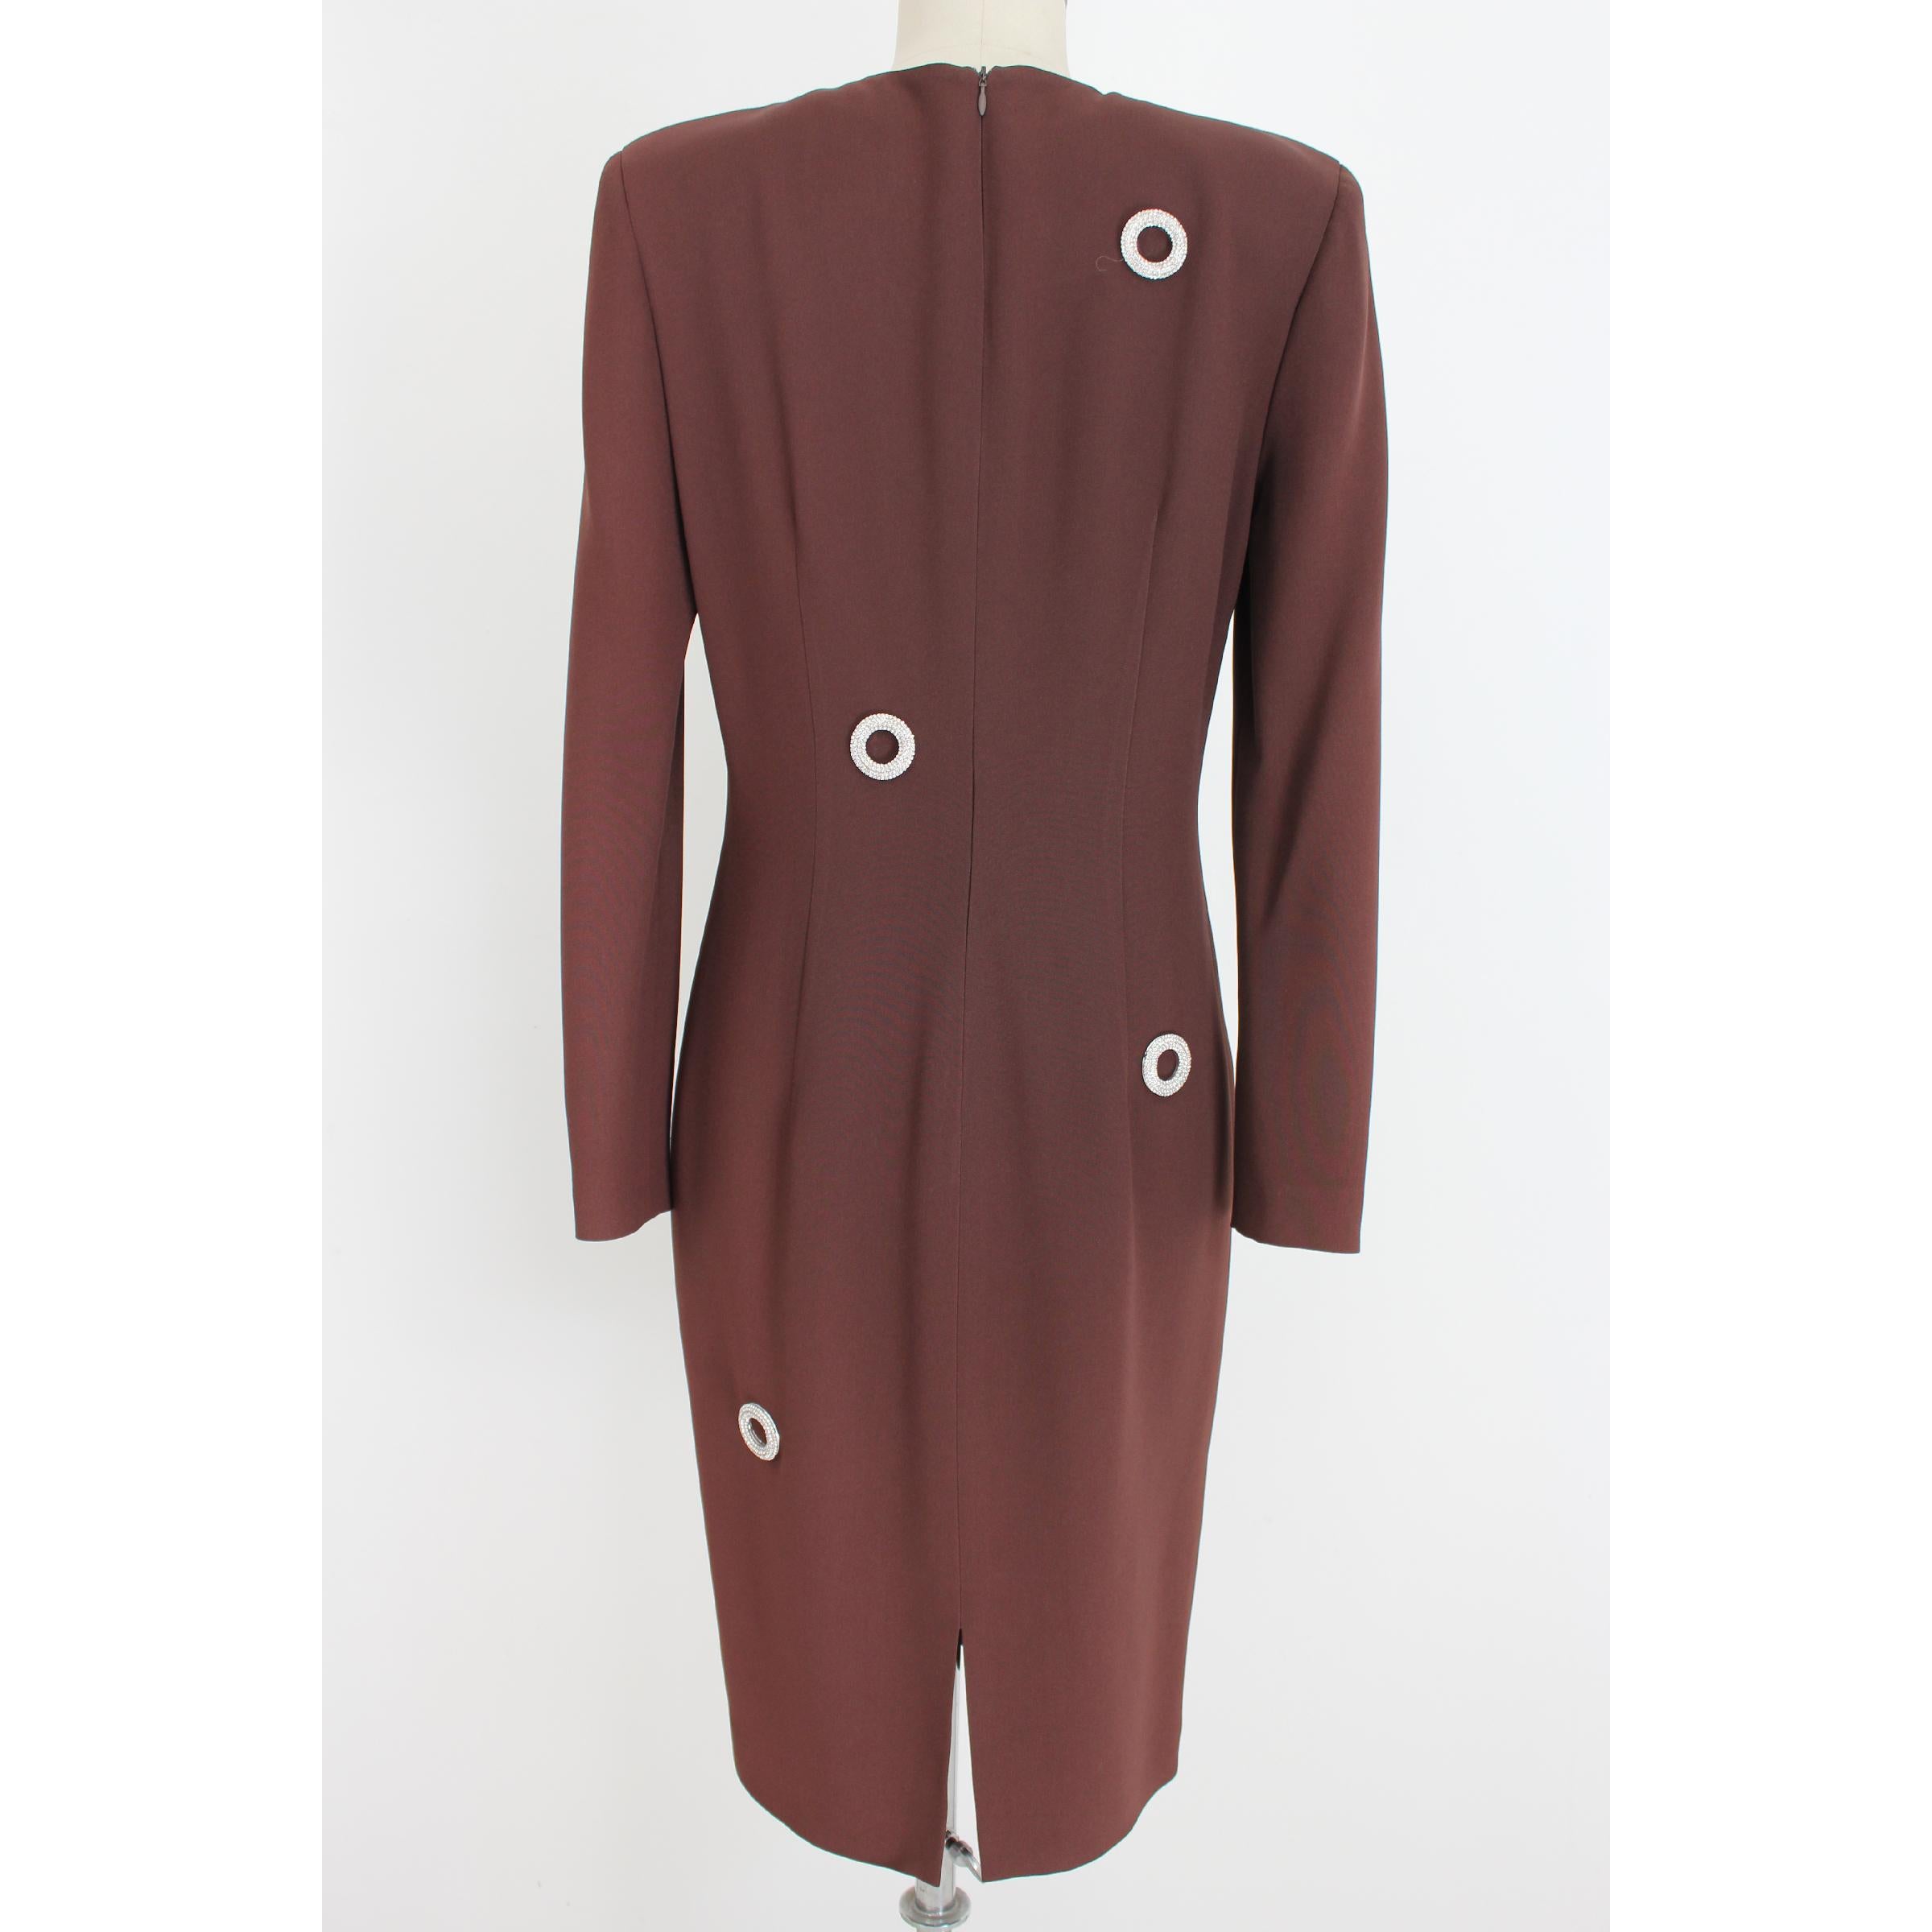 Gai Mattiolo Couture vintage dress, brown, 58% viscose 42% acetate. Long model, asymmetrical neck, Swarovski jewel applications. 90s. Made in Italy. New with label.

Size: 46 It 12 Us 14 Uk

Shoulder: 46 cm
Bust / chest: 51 cm
Sleeve: 61 cm
Length: